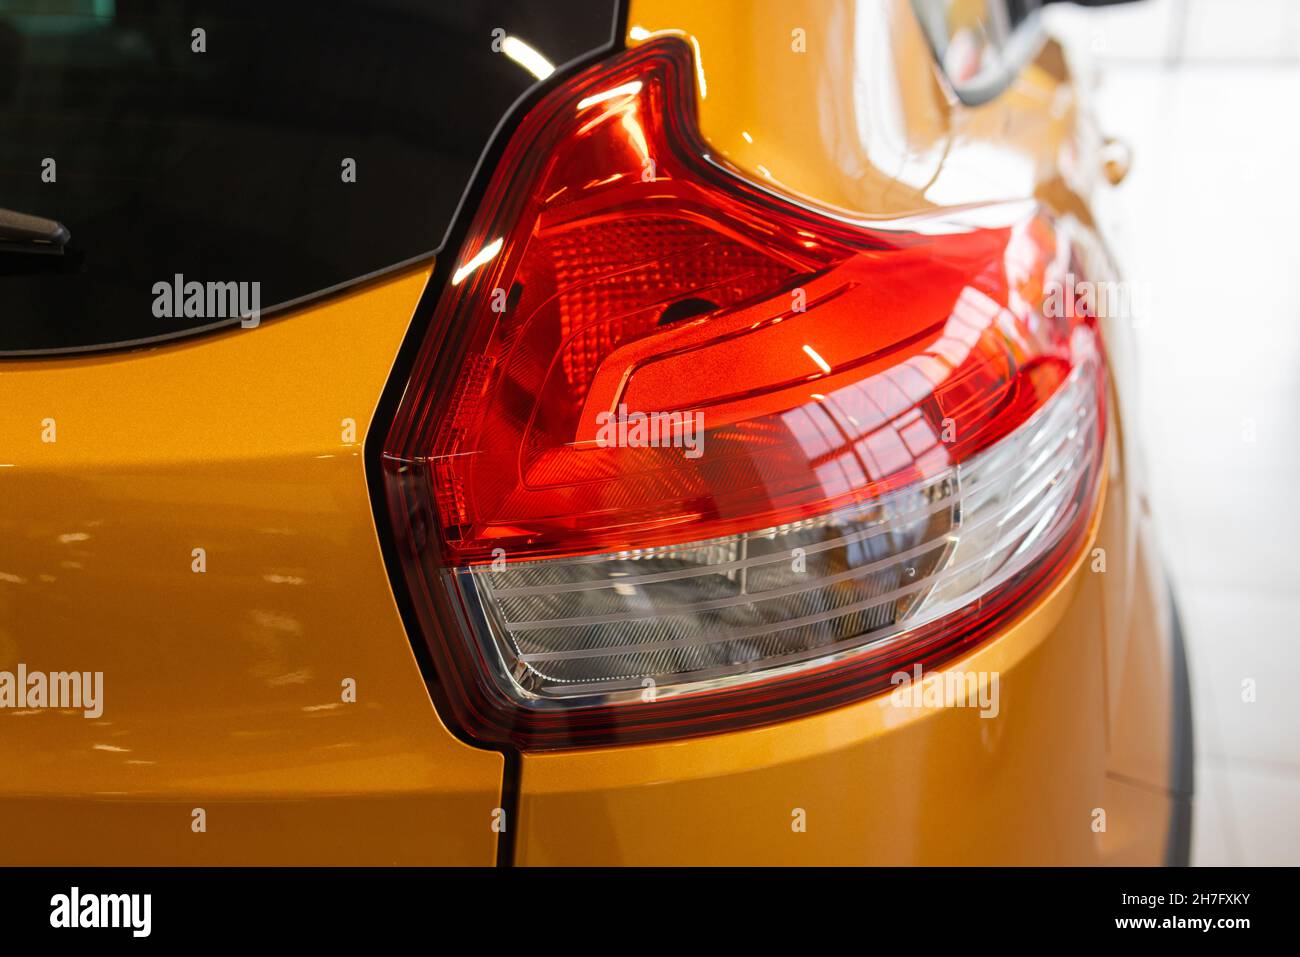 Closeup of rear light of orange Seat leon parked in the street Stock Photo